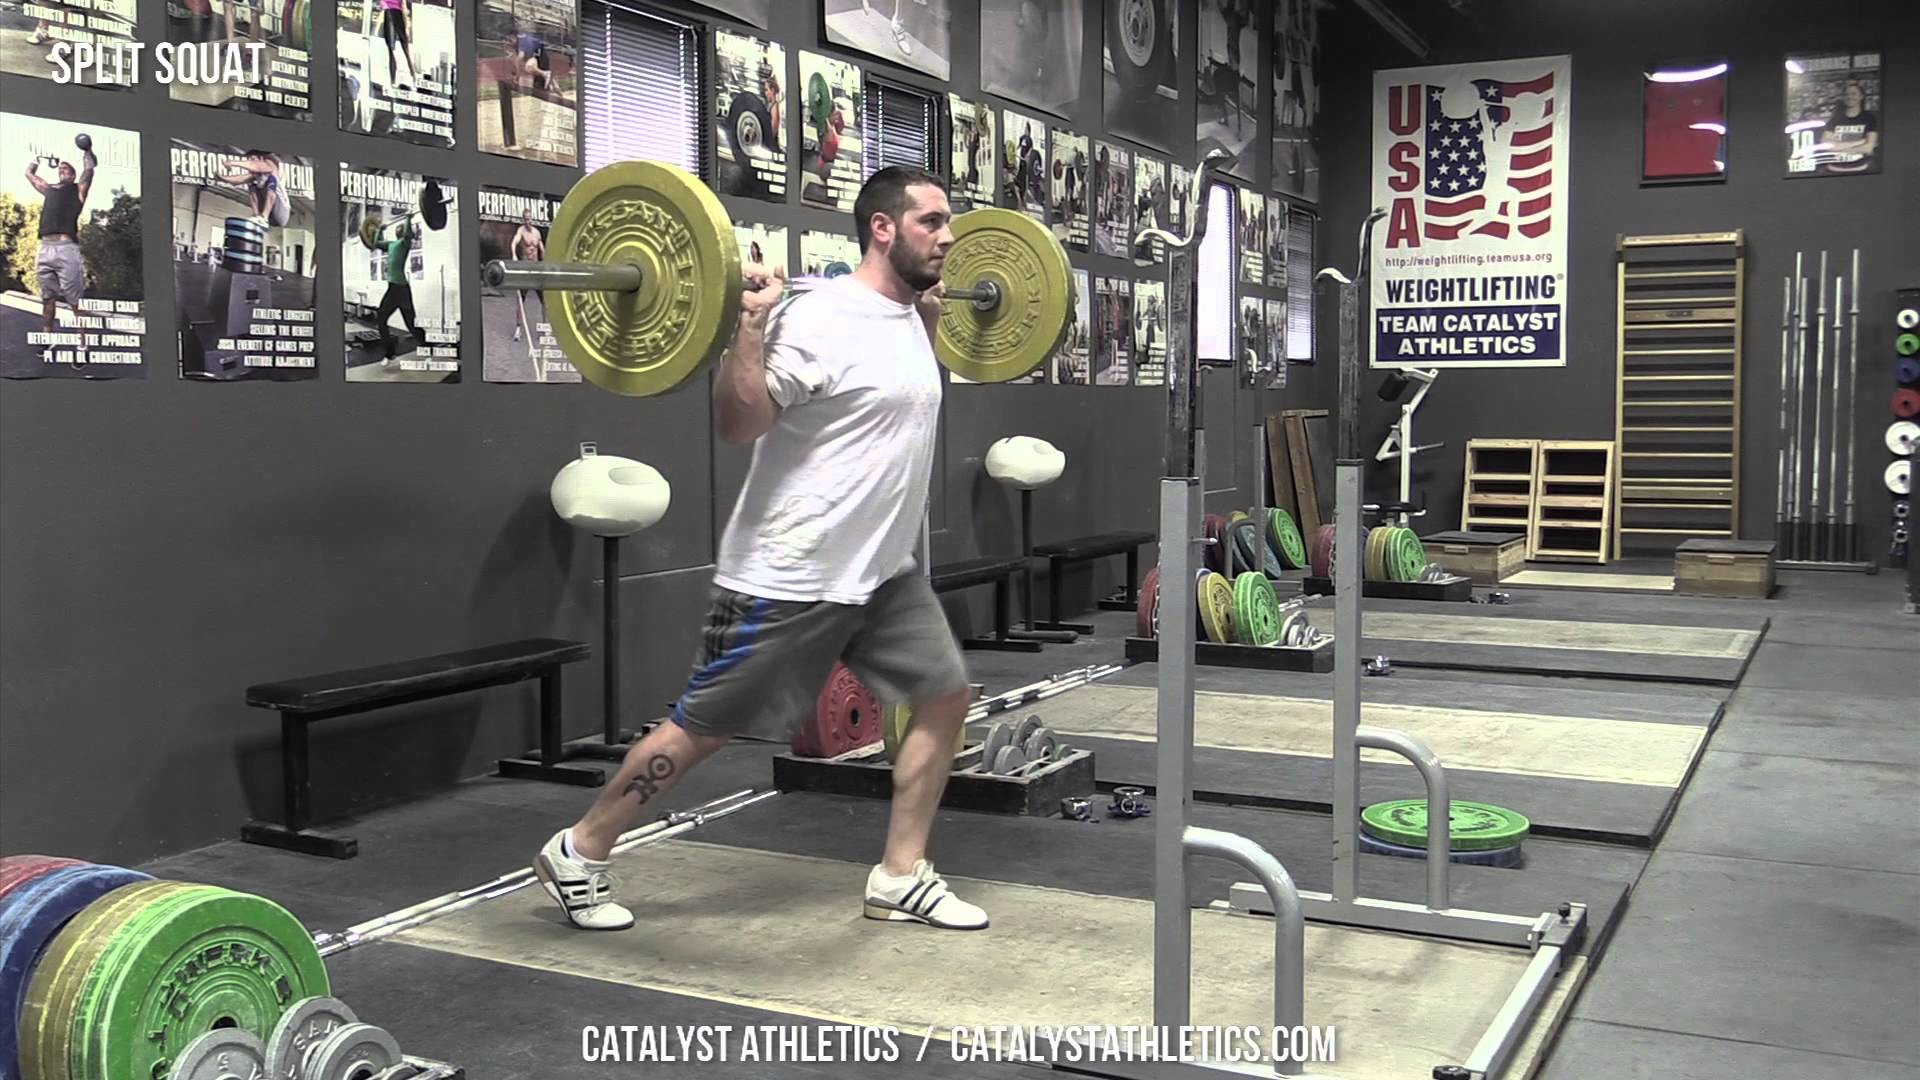 1920x1080 Split Squat - Exercise Library: Demo Videos, Information & Terminology -  Catalyst Athletics Olympic Weightlifting